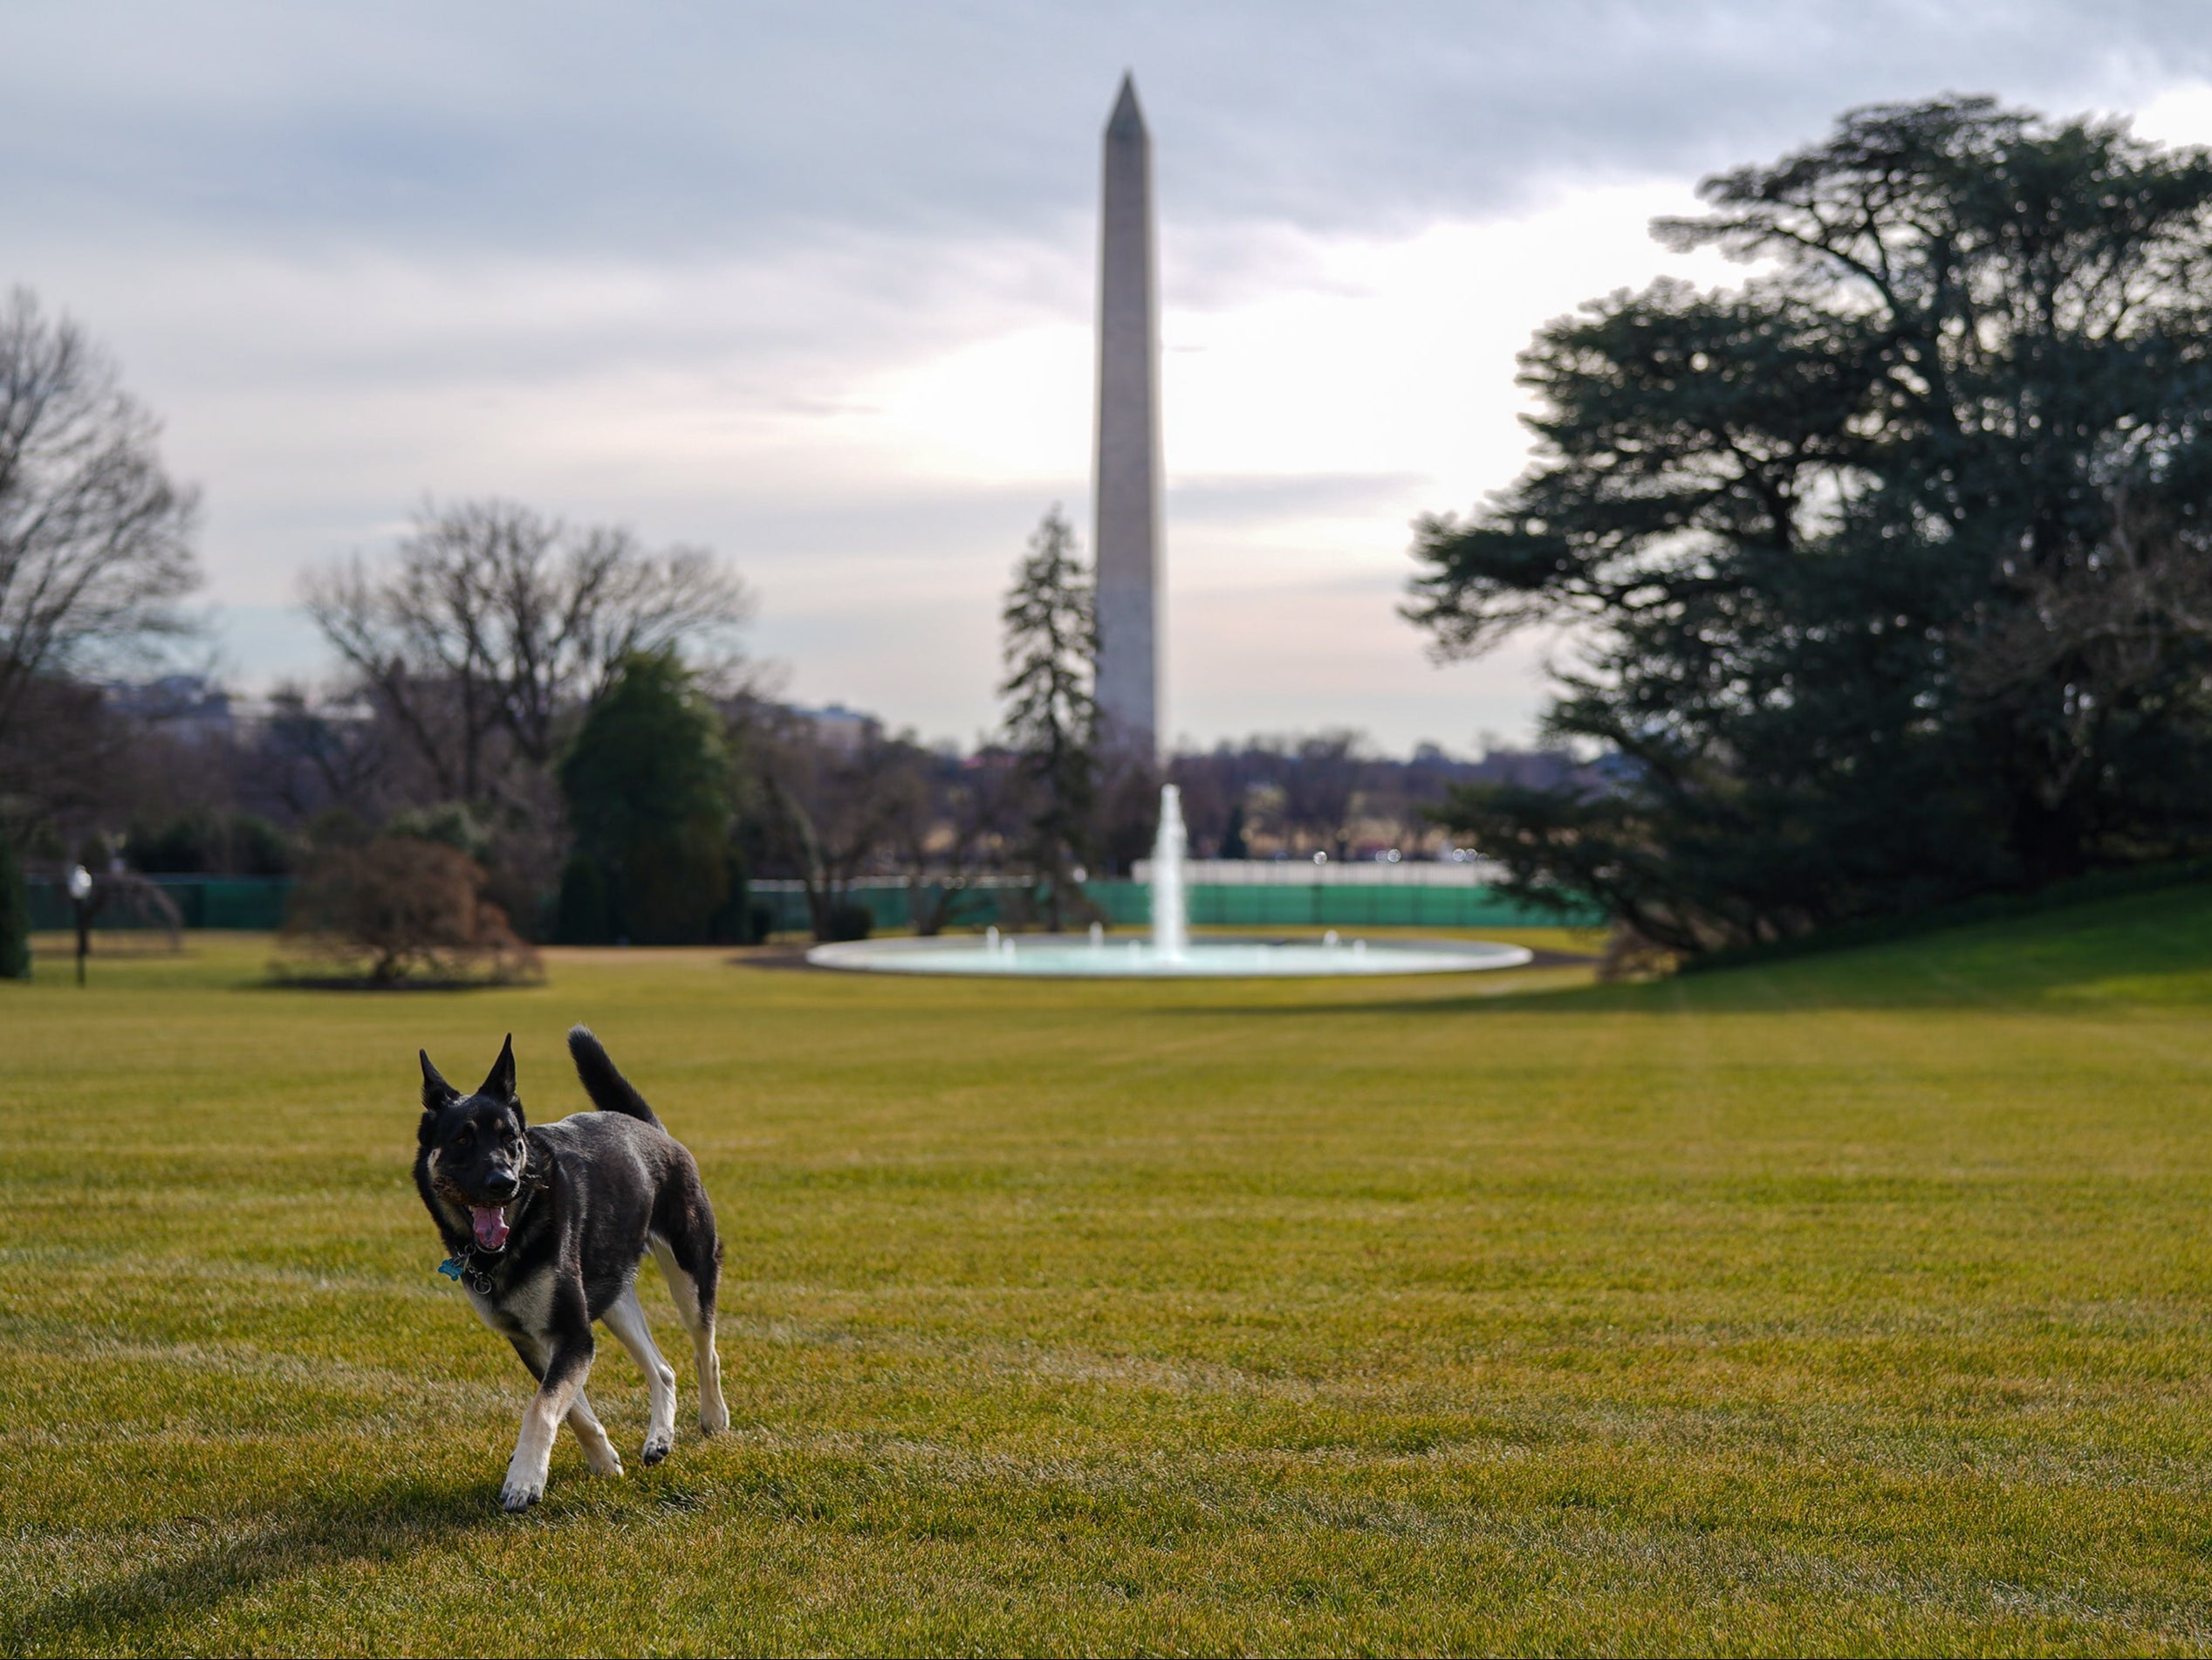 A handout photo made available by the White House shows First Dog Major outside the White House, in Washington, DC